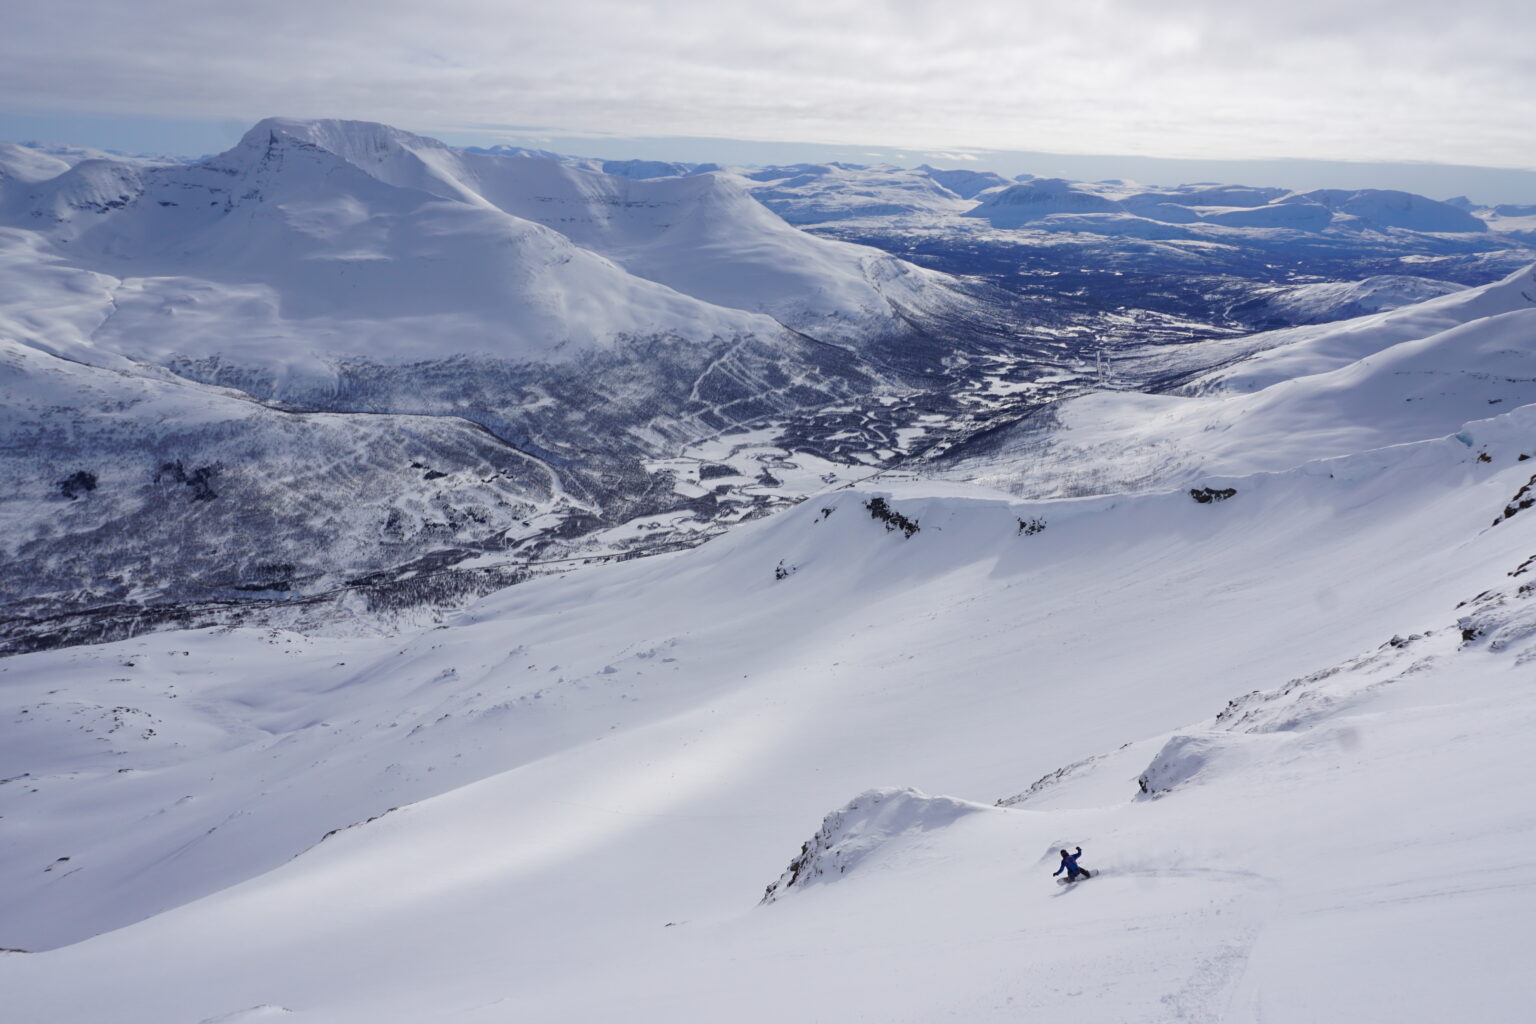 Snowboarding Blåbærfjellet South face with the Tamokdalen backcountry in the distance